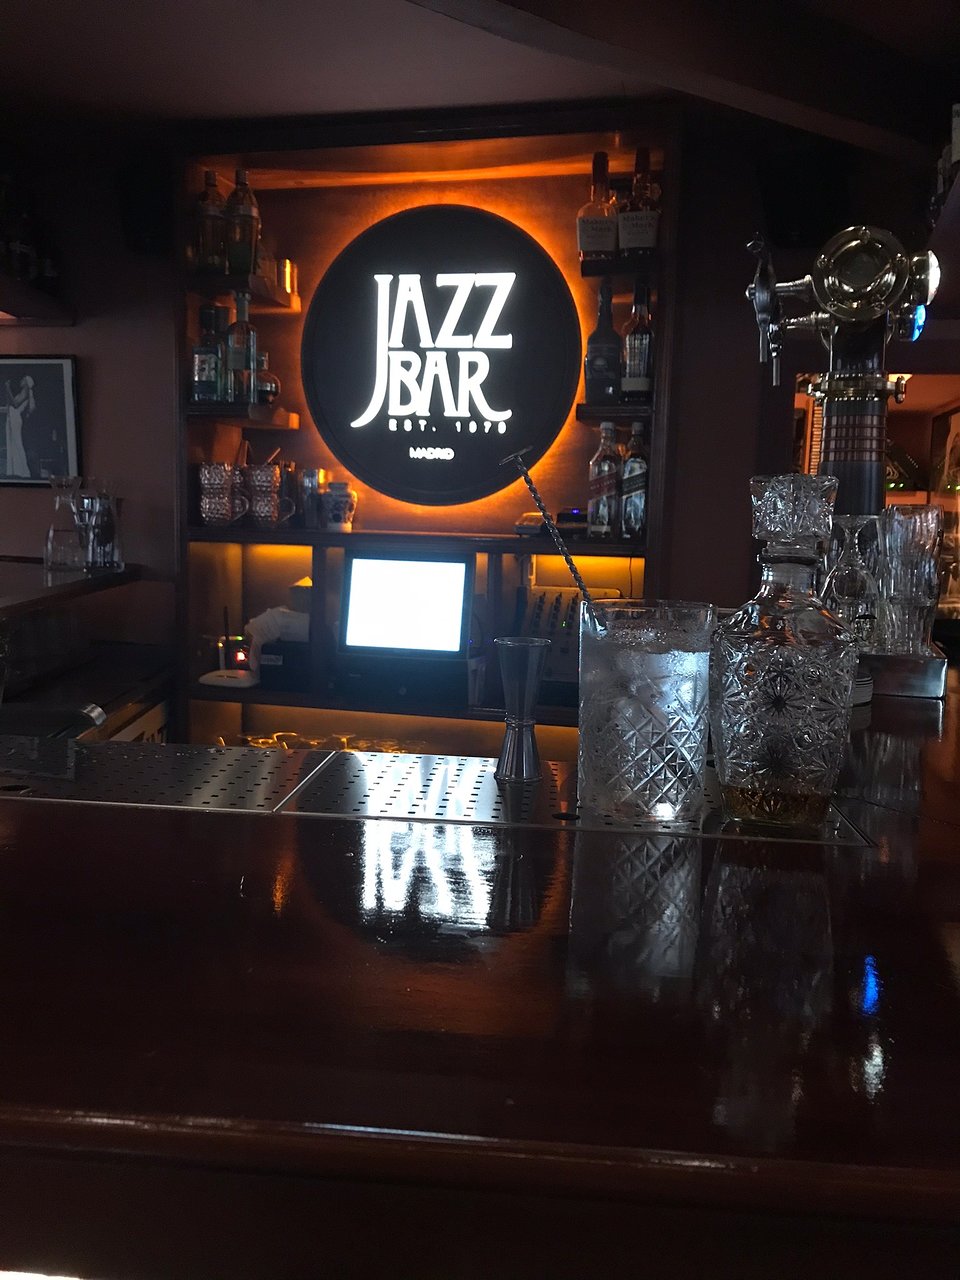 Table Haute Bistrot Charmant Jazz Bar Madrid 2020 All You Need to Know before You Go